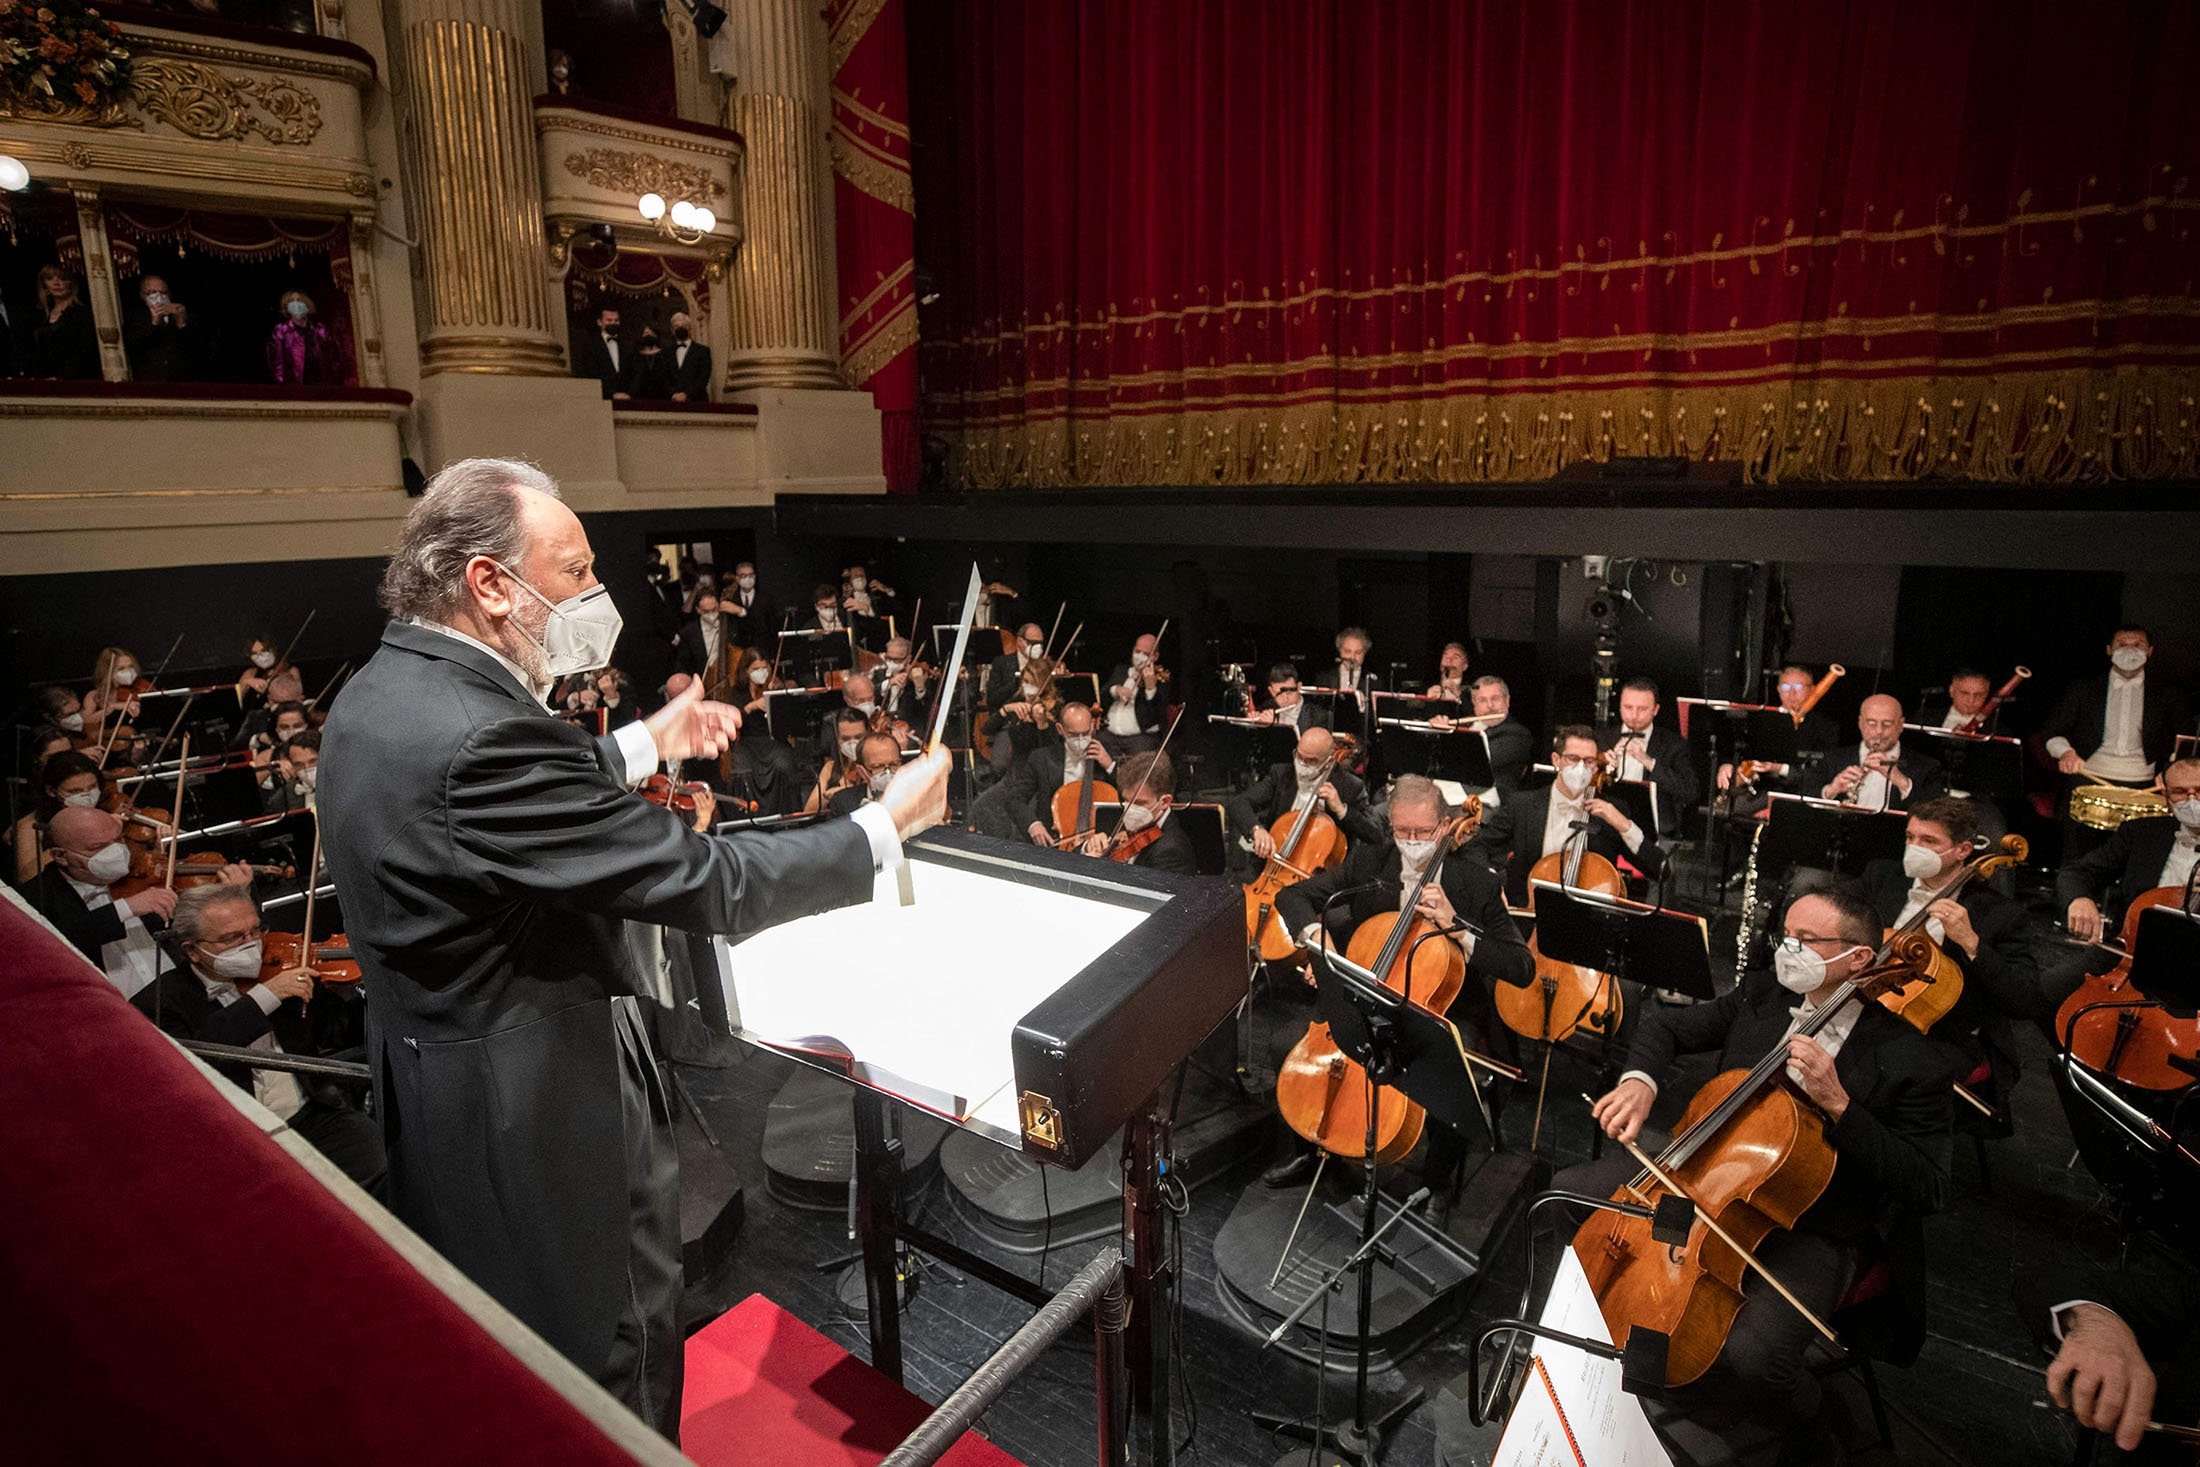 Italian conductor Riccardo Chailly during the season's opening performance of Giuseppe Verdi's “Macbeth” at La Scala opera house in Milan, Italy, Dec. 7, 2021. (Quirinale Press Office via AFP)